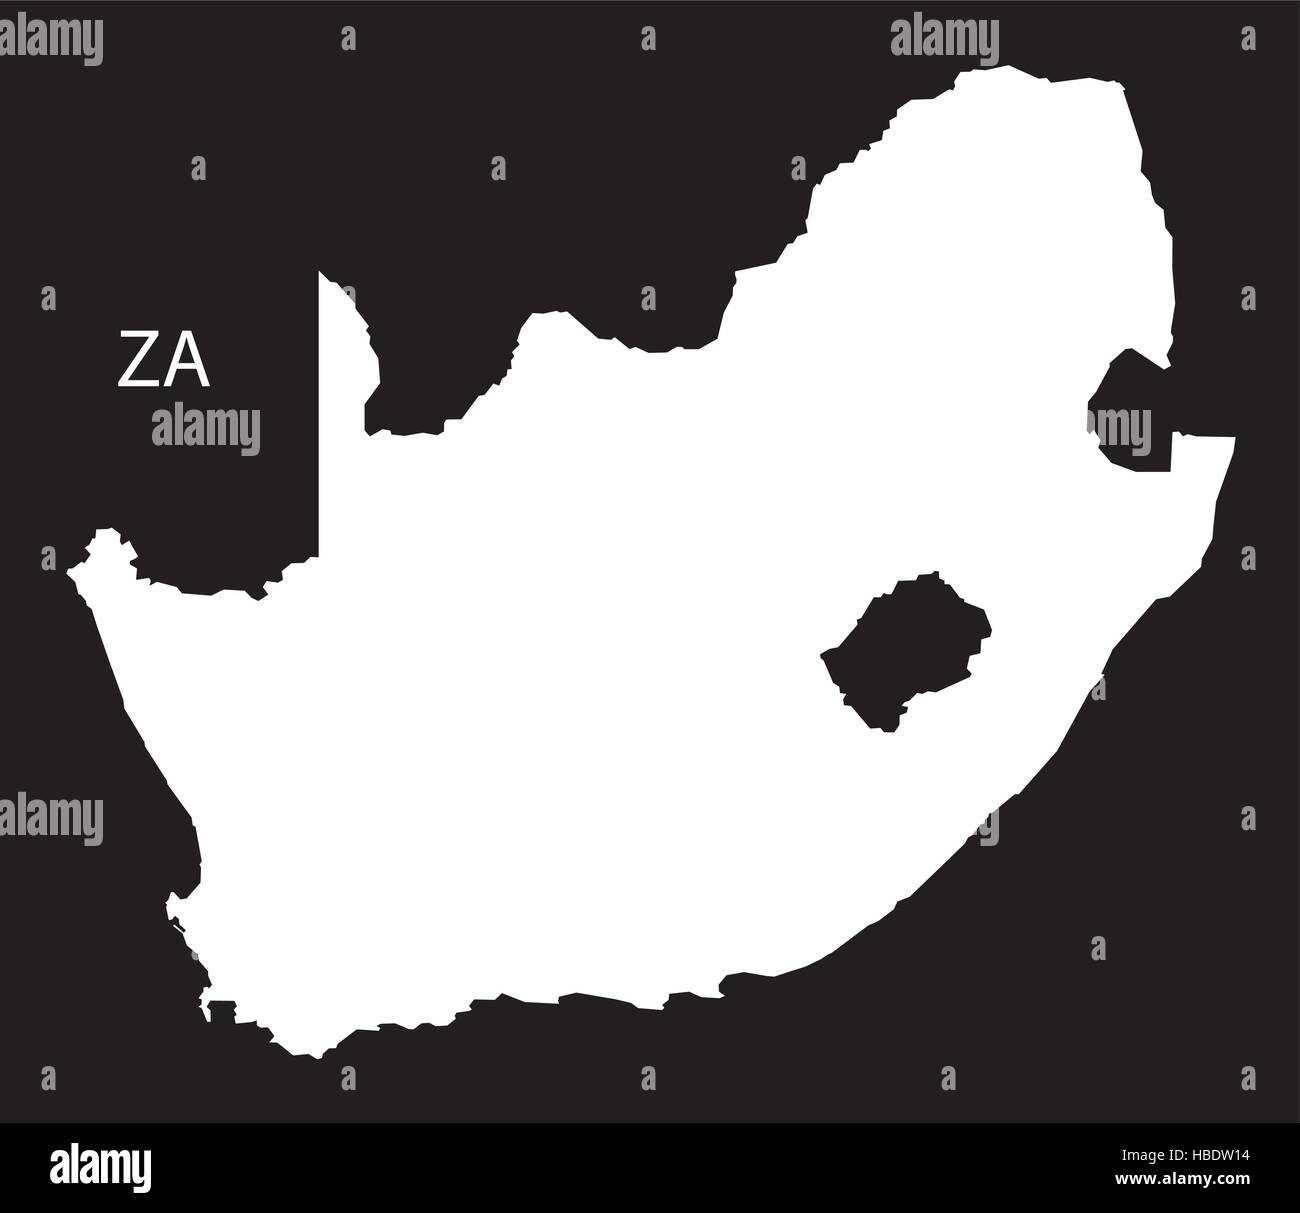 South Africa Map black white Stock Vector